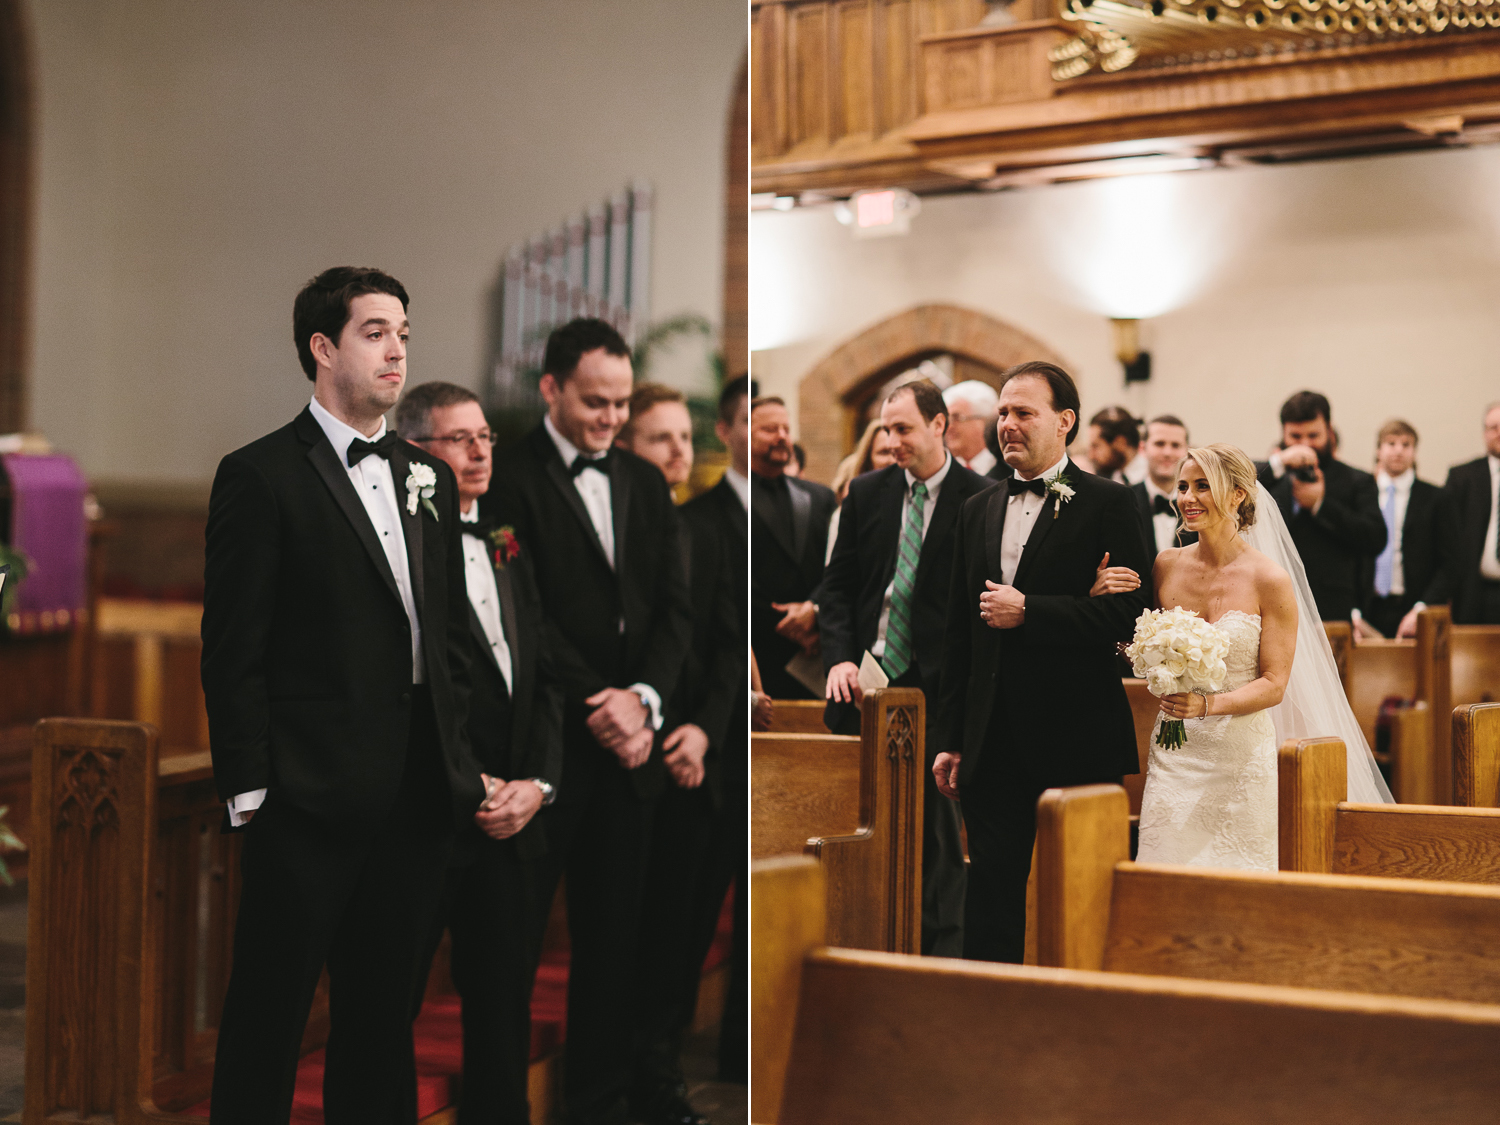 groom first sees his bride walking down the aisle